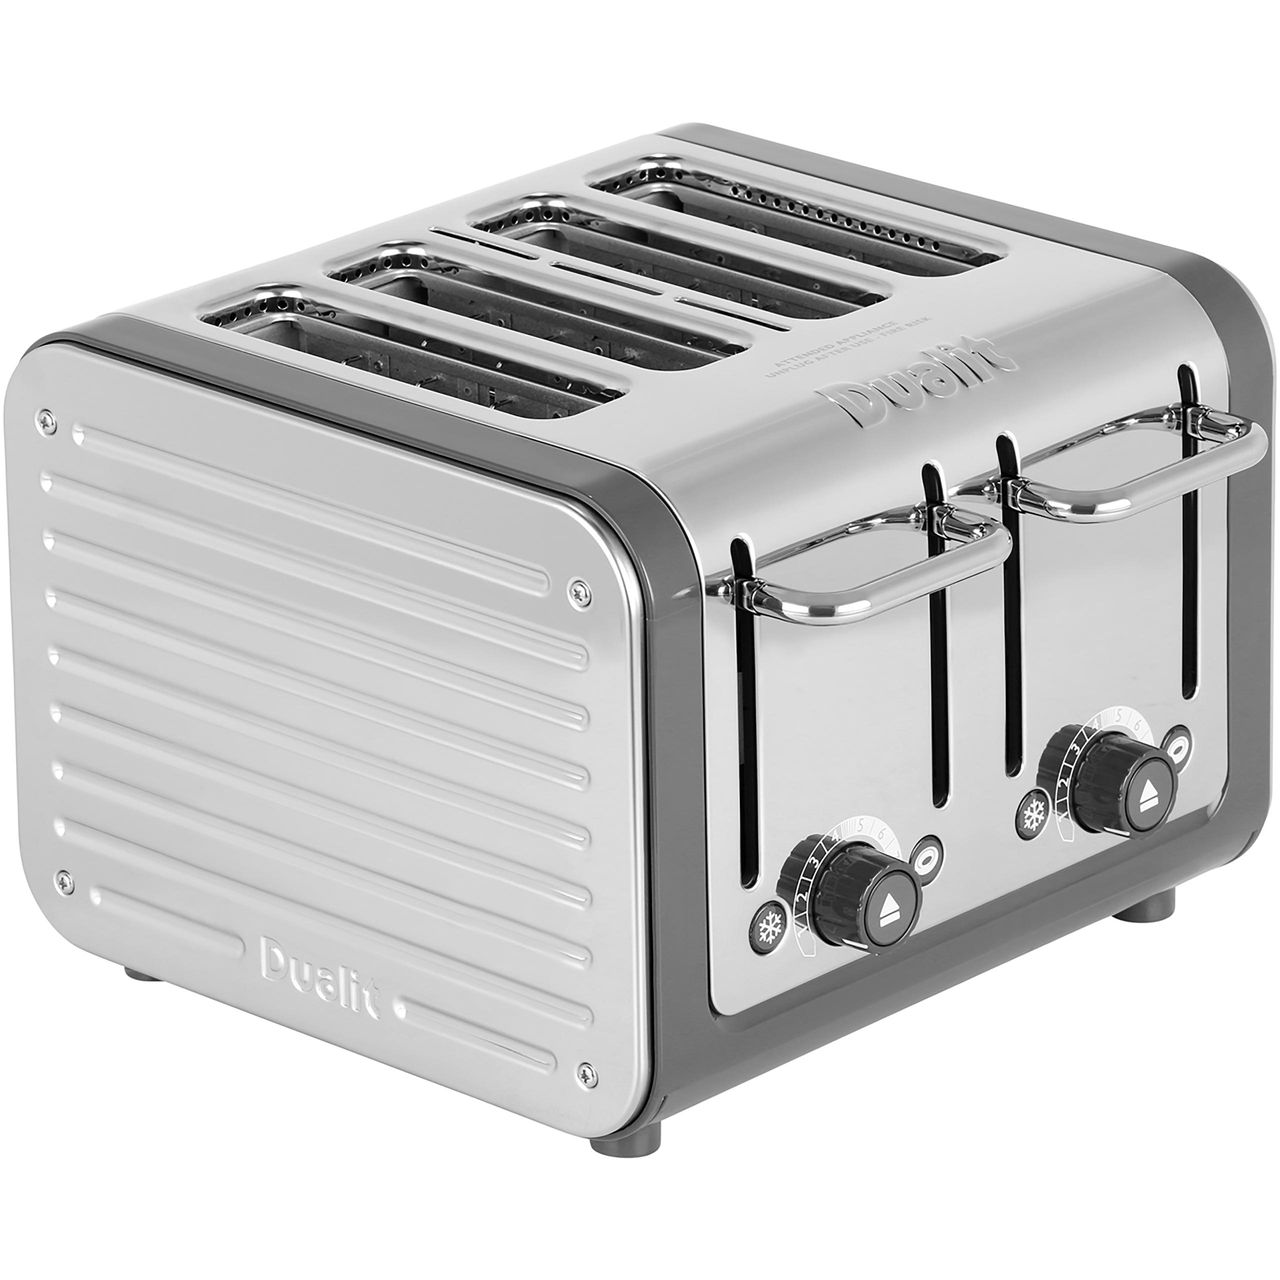 Dualit 46526 Architect 4 Slice Toaster Stainless Steel 619743465269 | eBay Dualit 4 Slice Toaster Stainless Steel